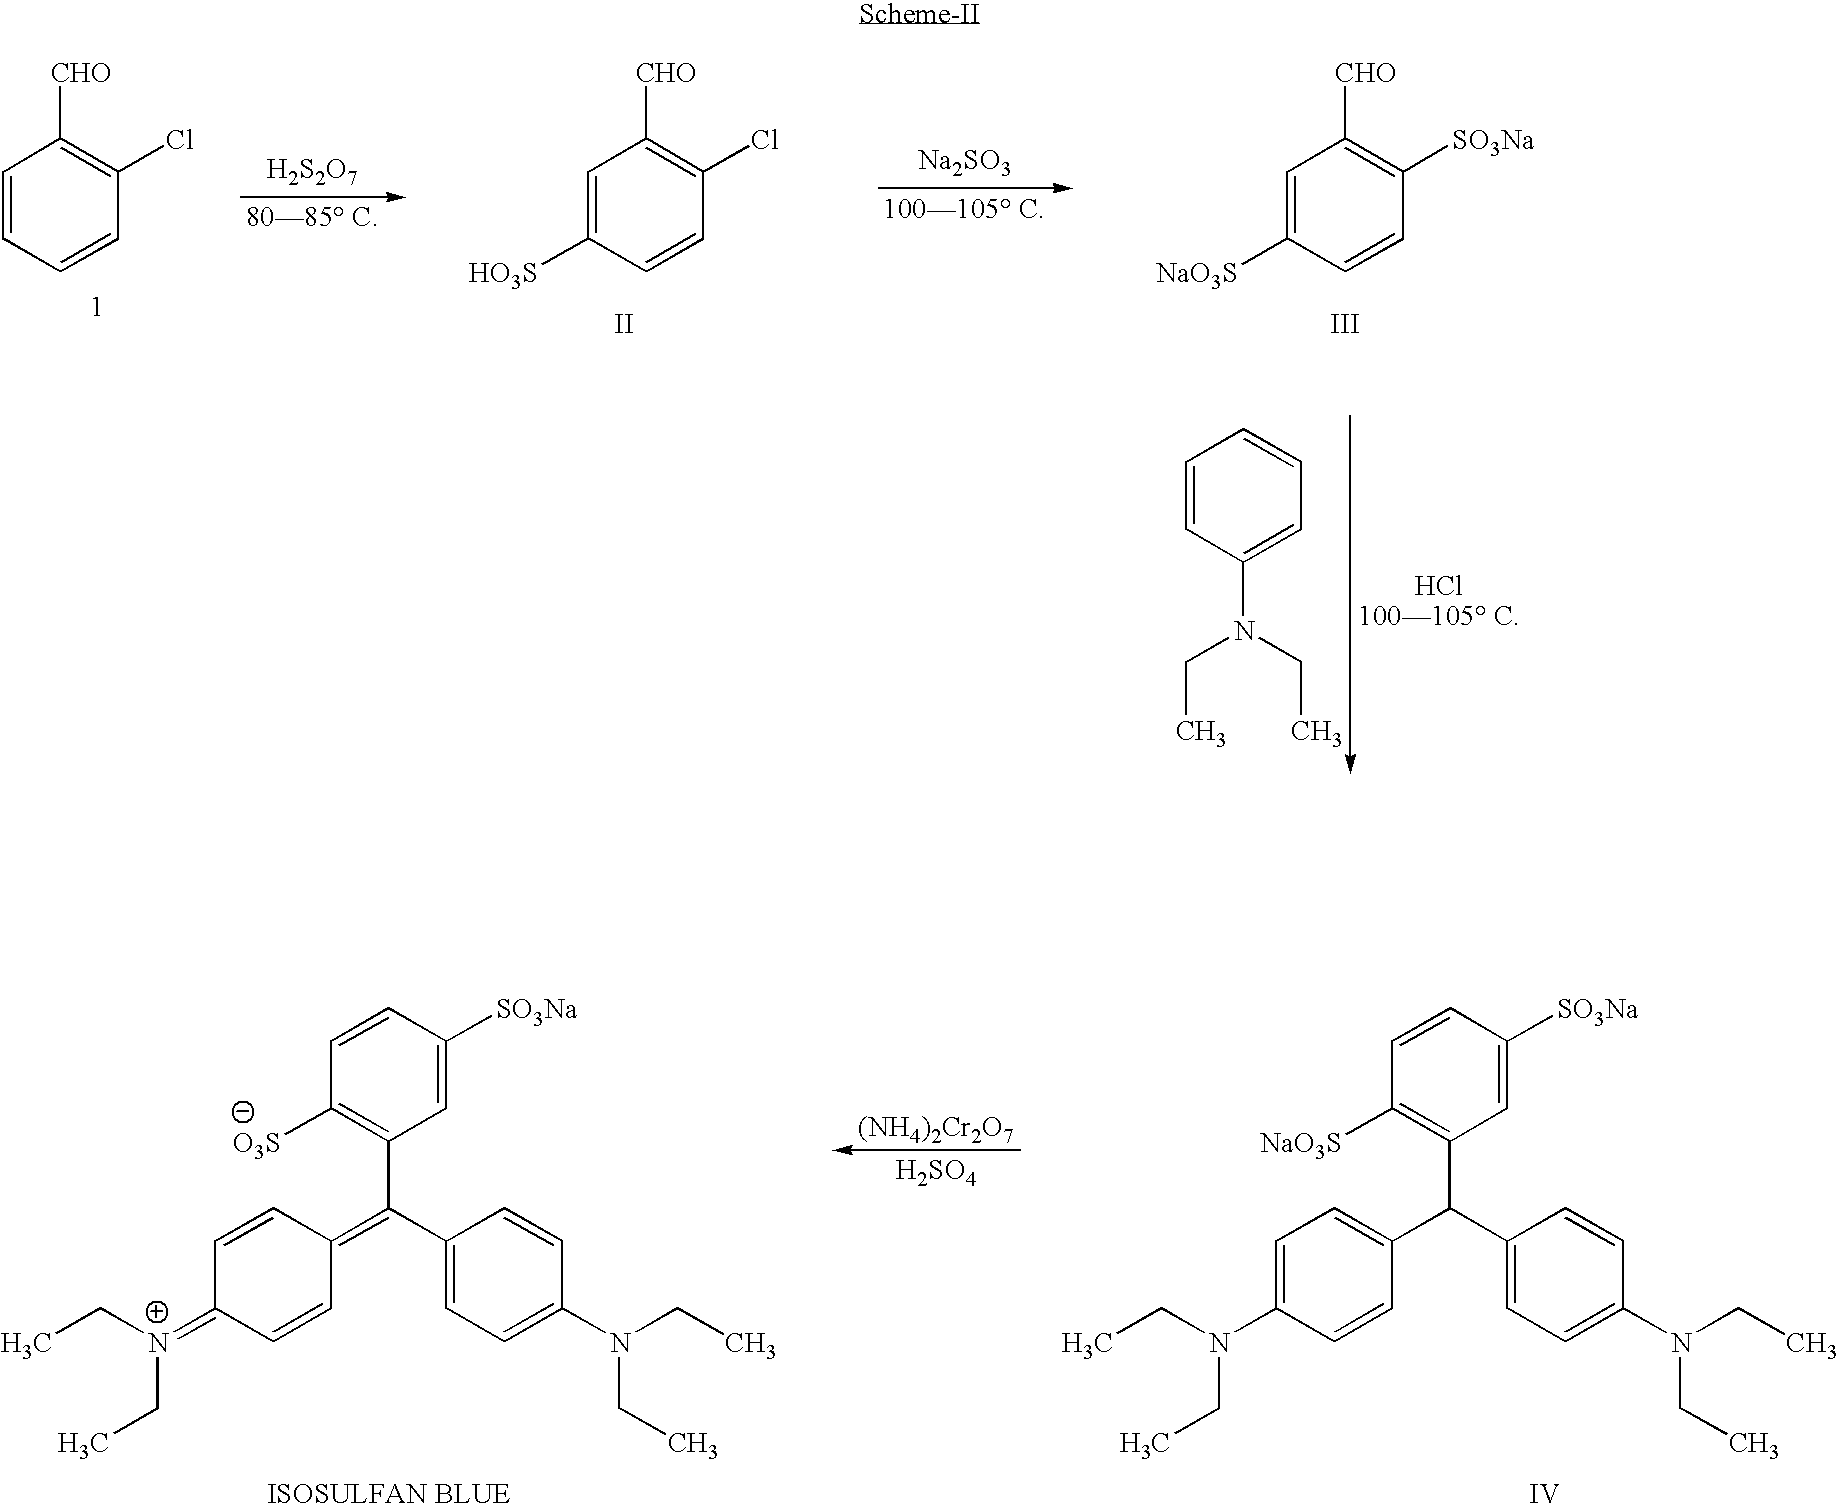 A process for the preparation of isosulphan blue